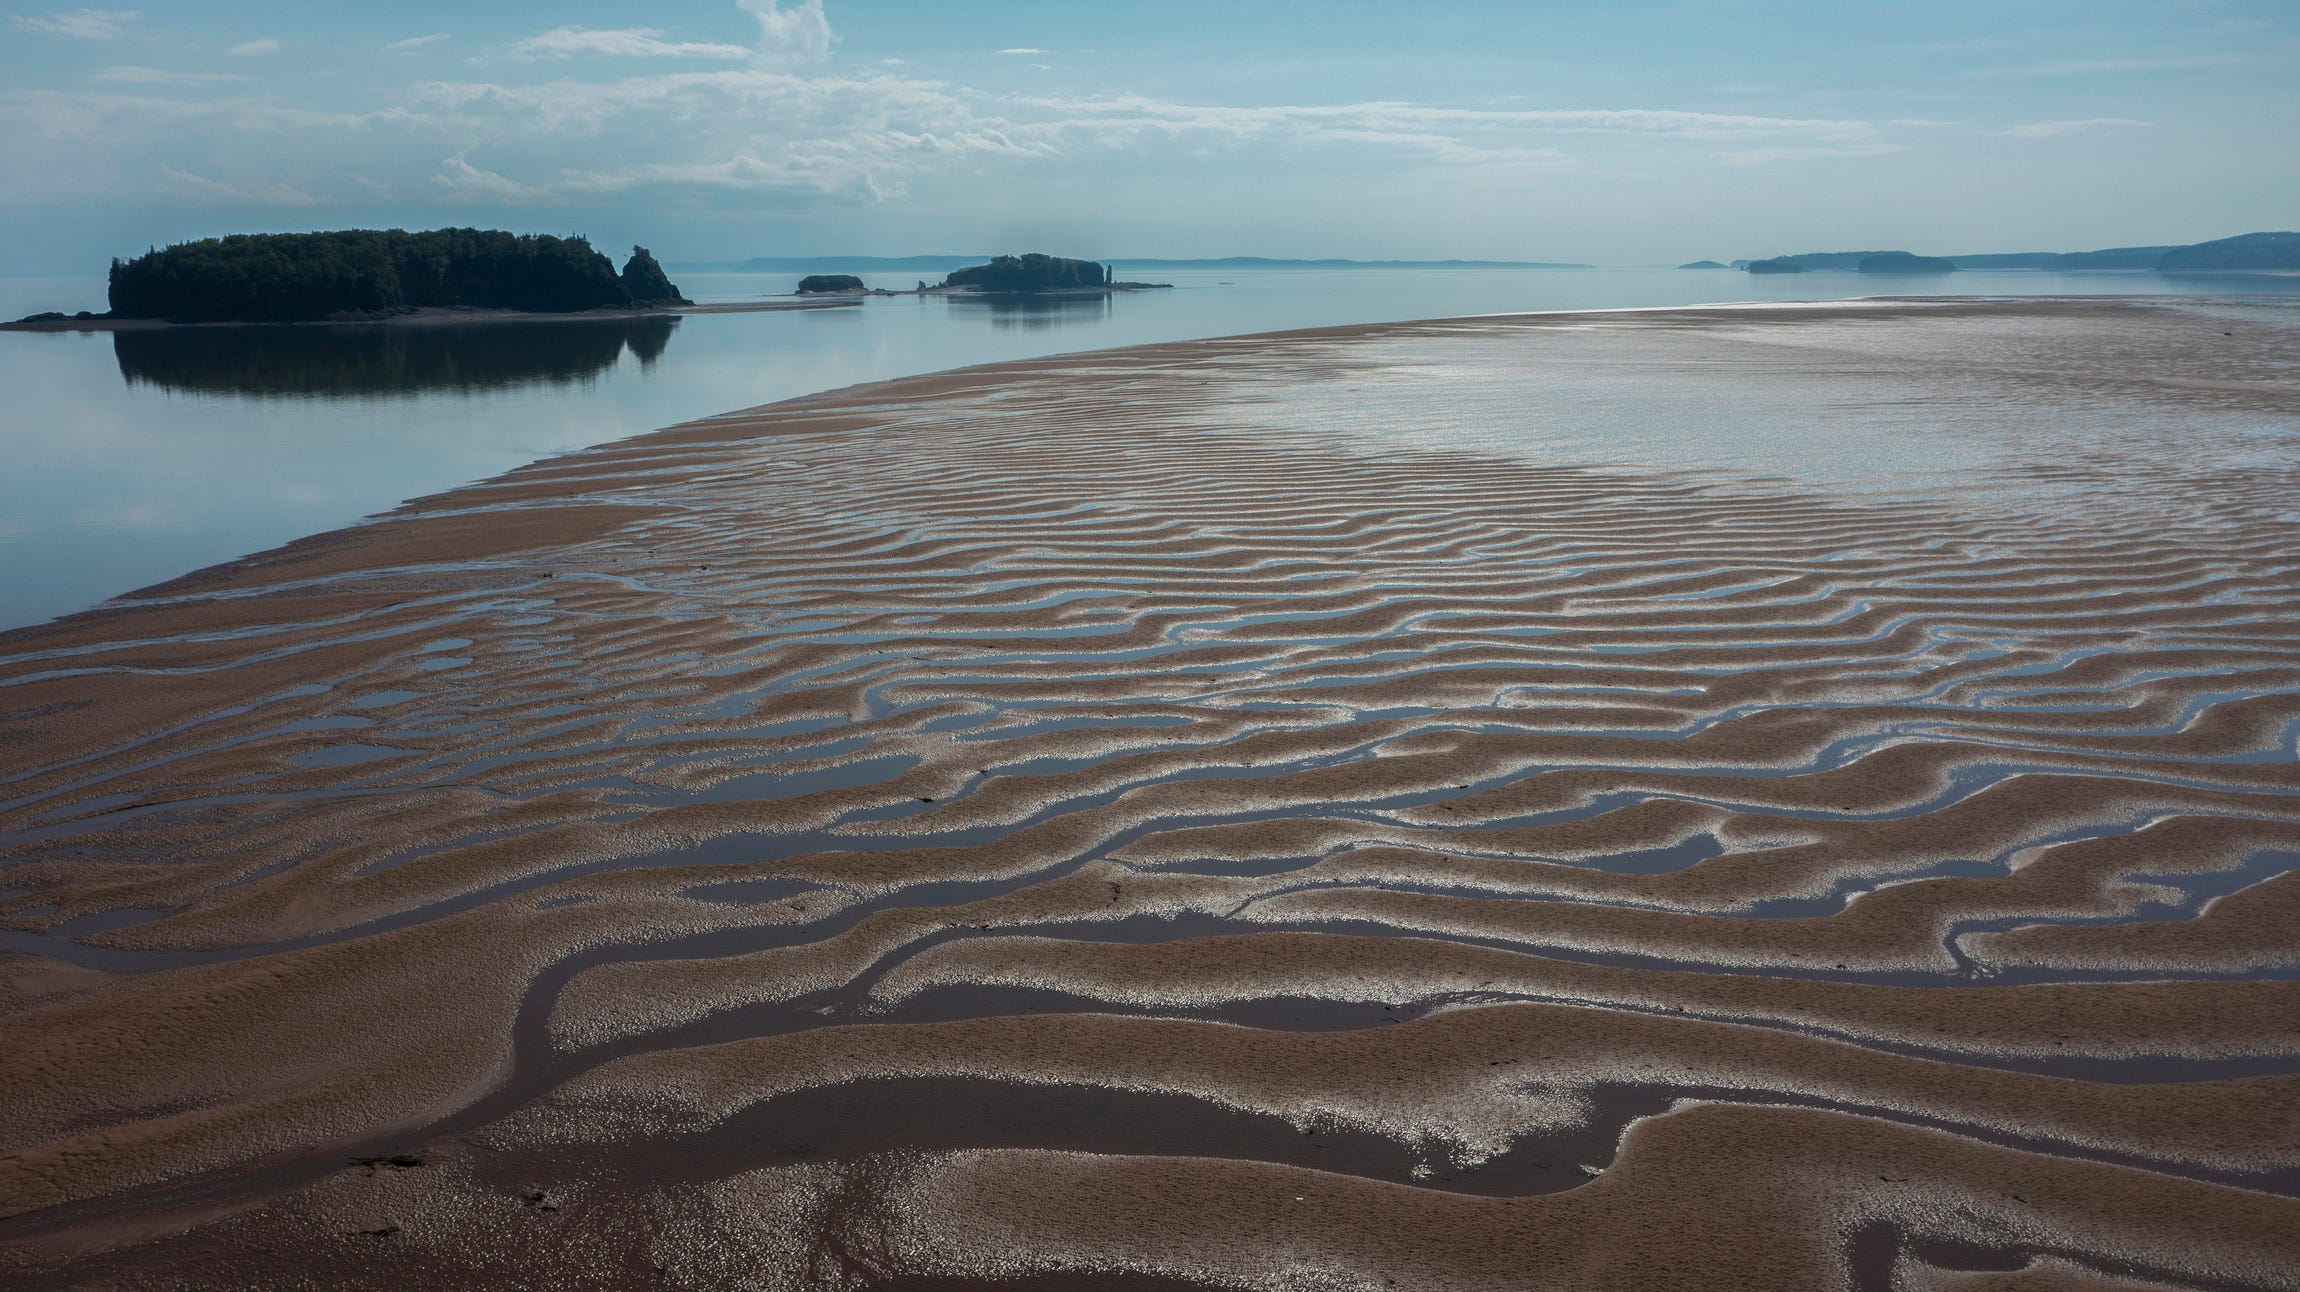 A receding tide is seen leaving the Bay of Fundy in Nova Scotia, Canada, in late June 2022.